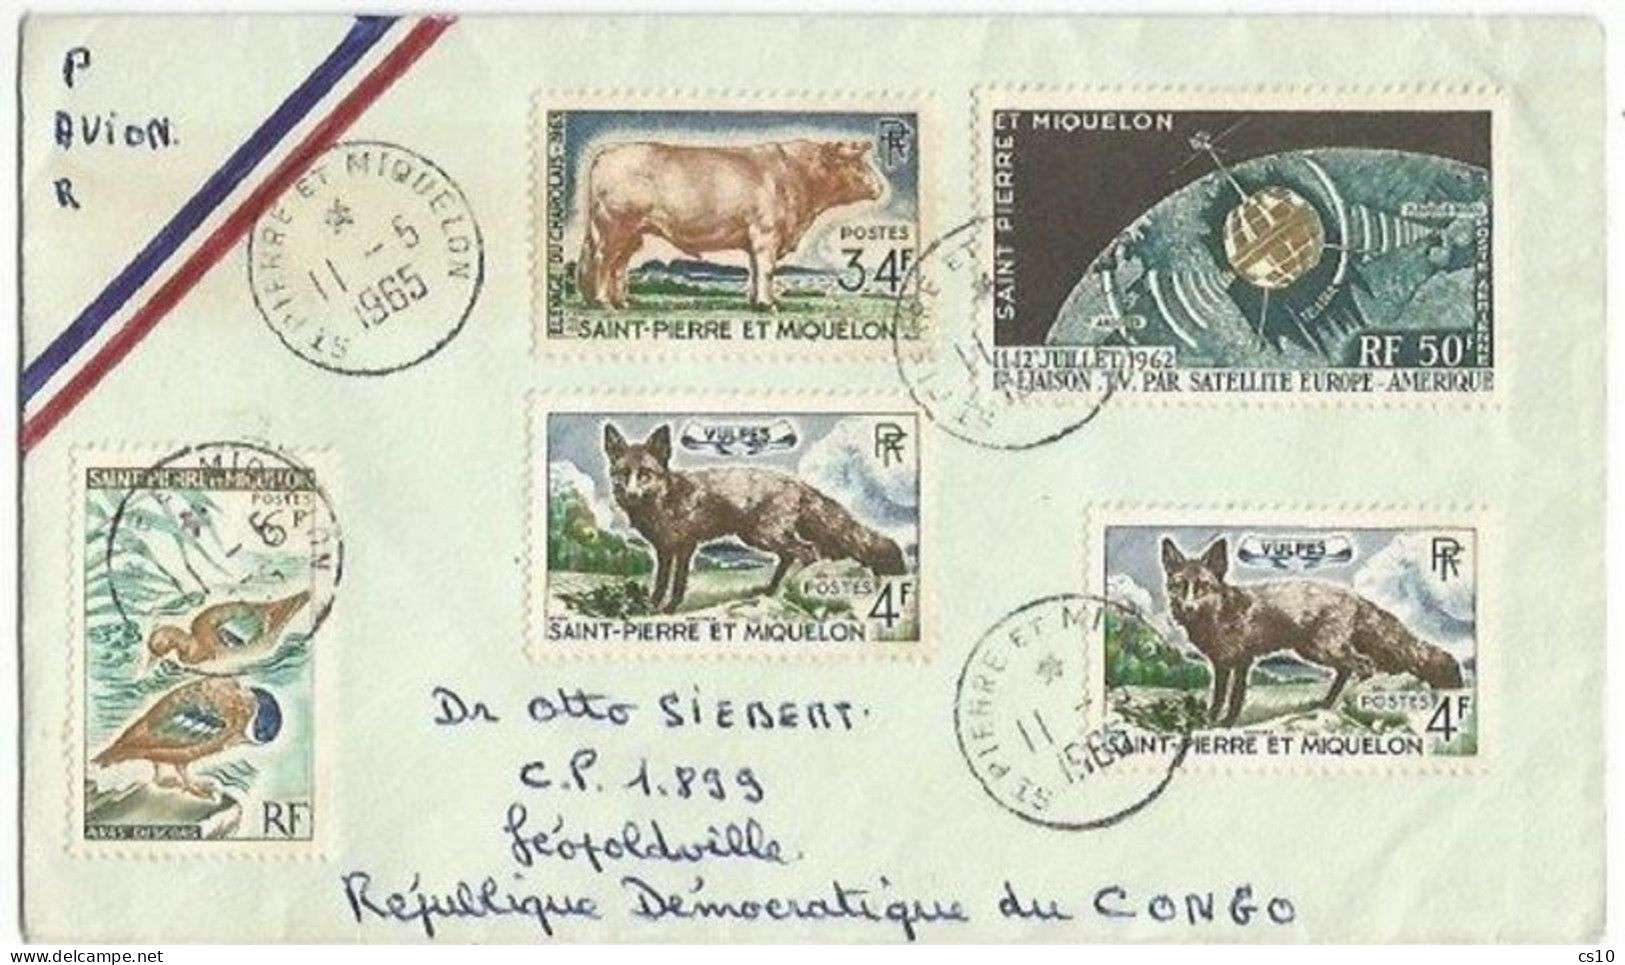 SCARCE! St.Pierre Miquelon AirmailCV 11may1965 With 5 Stamps Rate 98F DIRECTED TO CONGO Not France Or Canada !!!!!! - América Del Norte